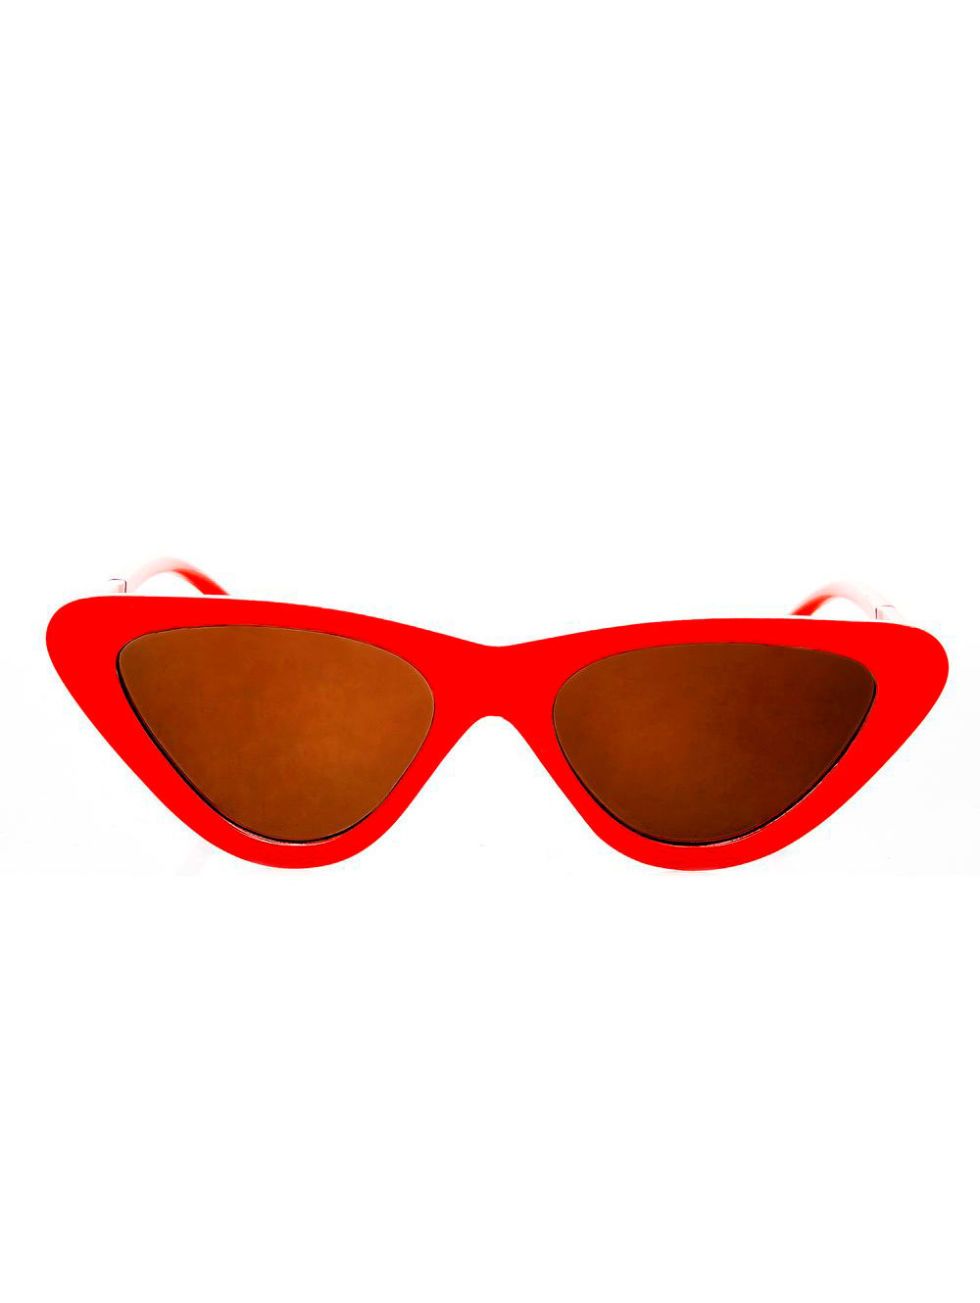 Eyewear, Glasses, Vision care, Brown, Sunglasses, Personal protective equipment, Red, Orange, Goggles, Carmine, 